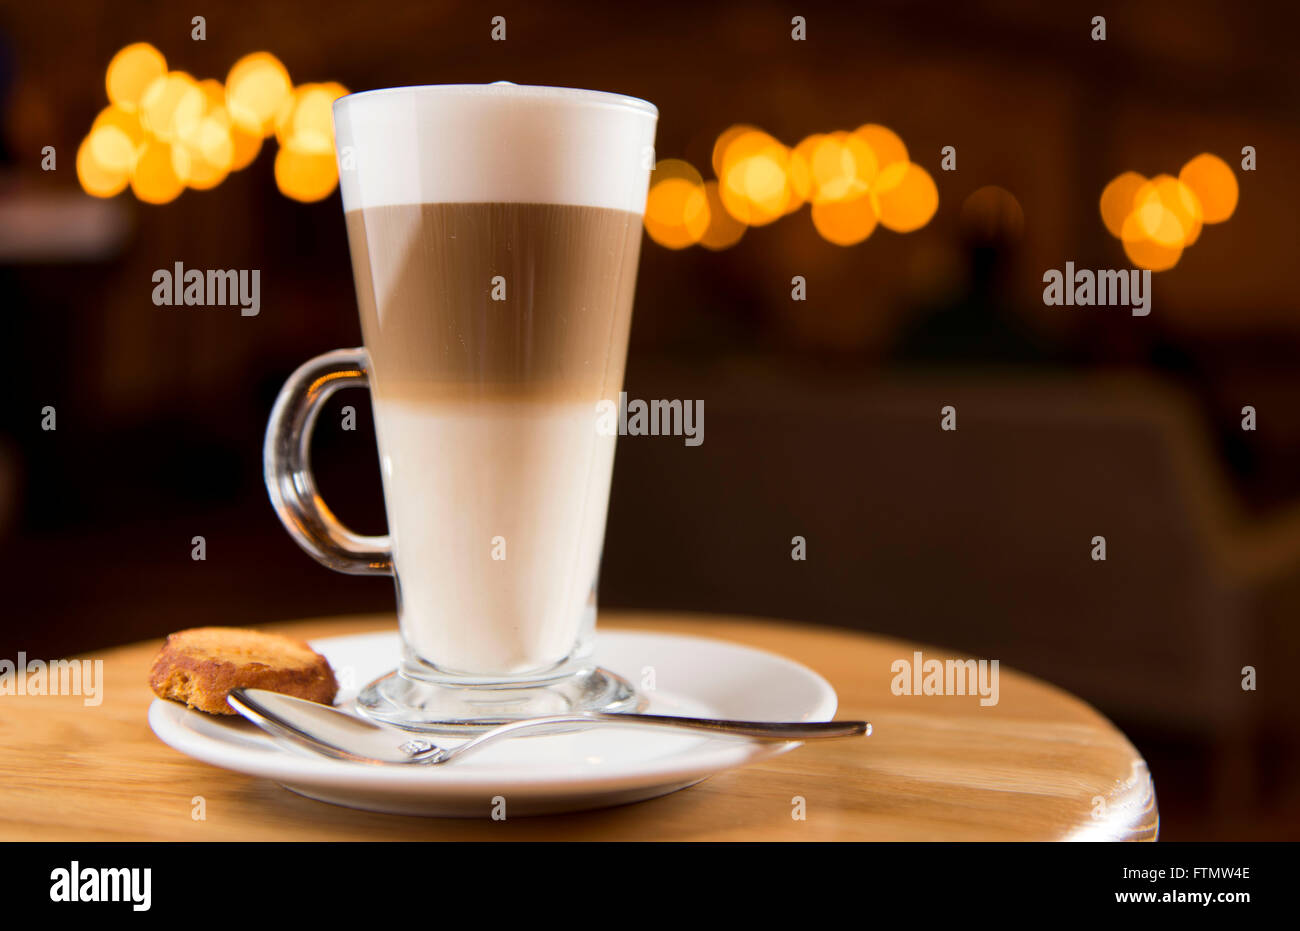 Caffe macchiato coffee drink in a long glass served in a coffee shop on a saucer with a biscuit. Stock Photo